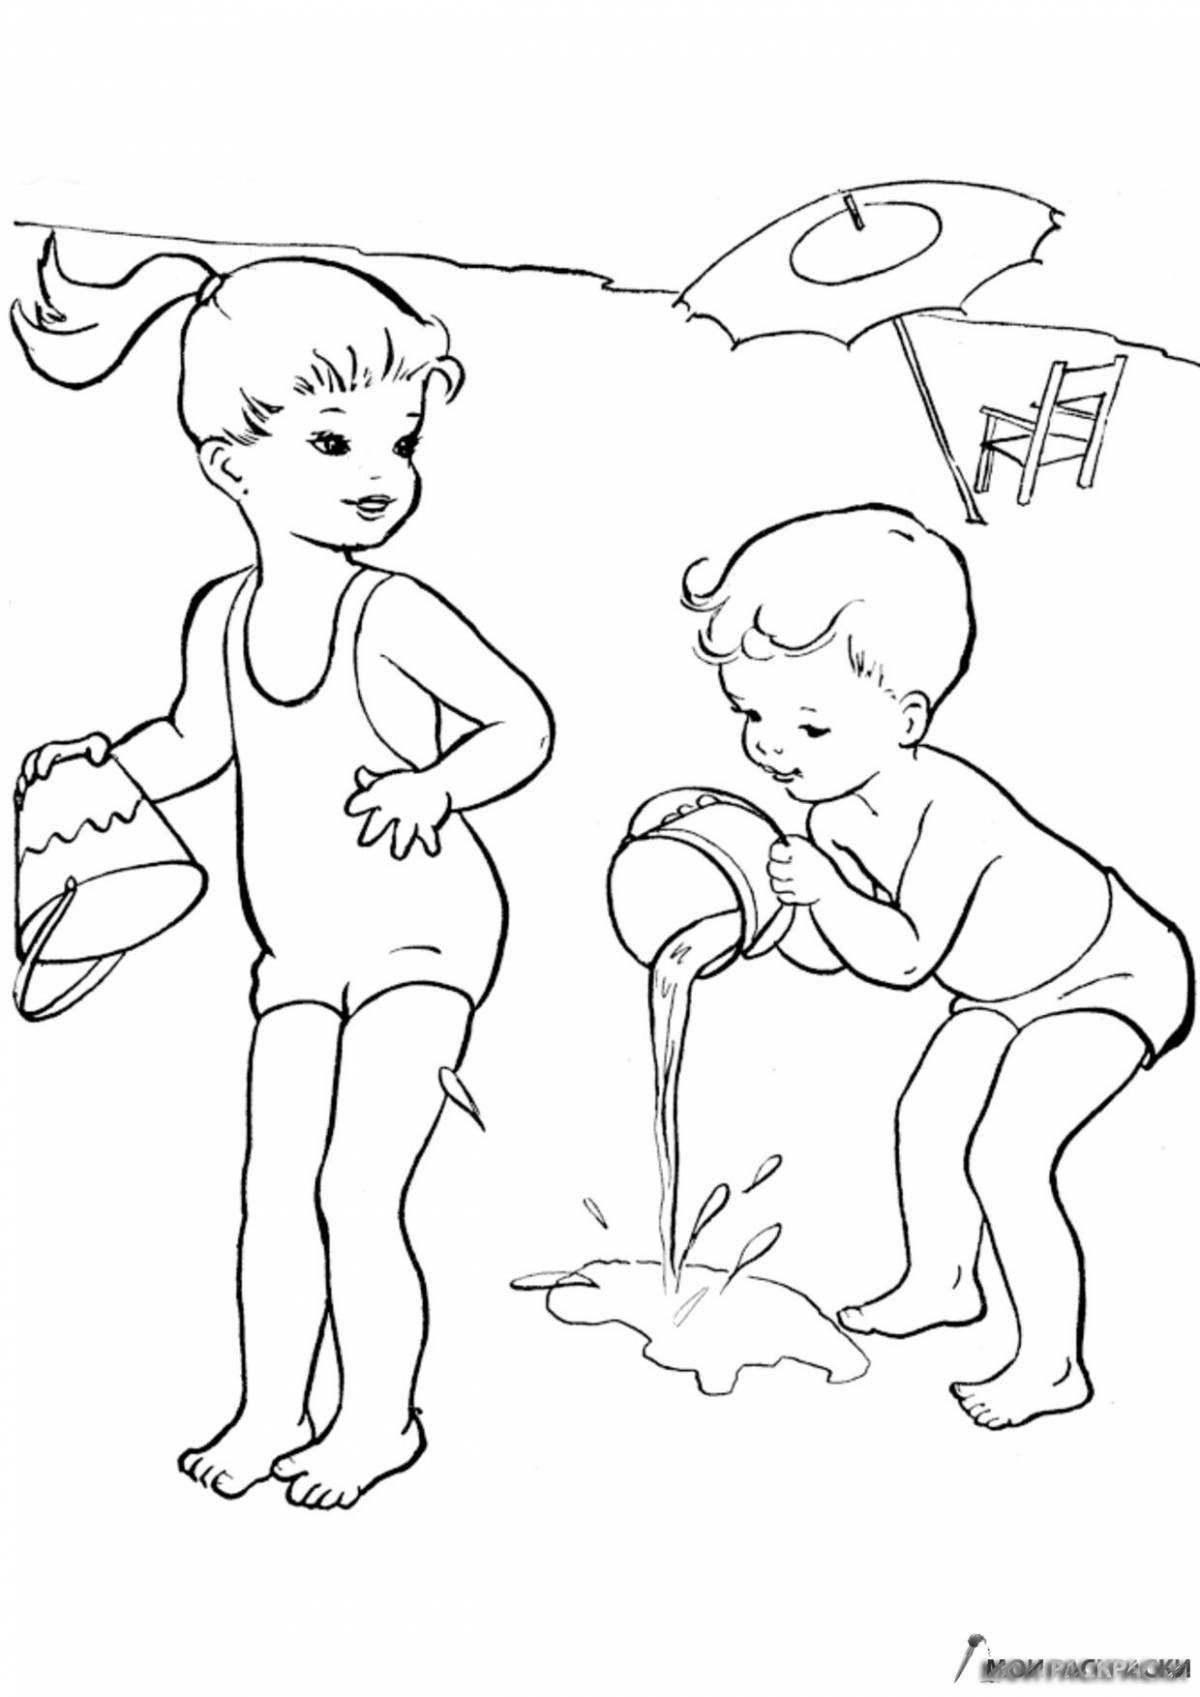 Amazing hardening coloring page